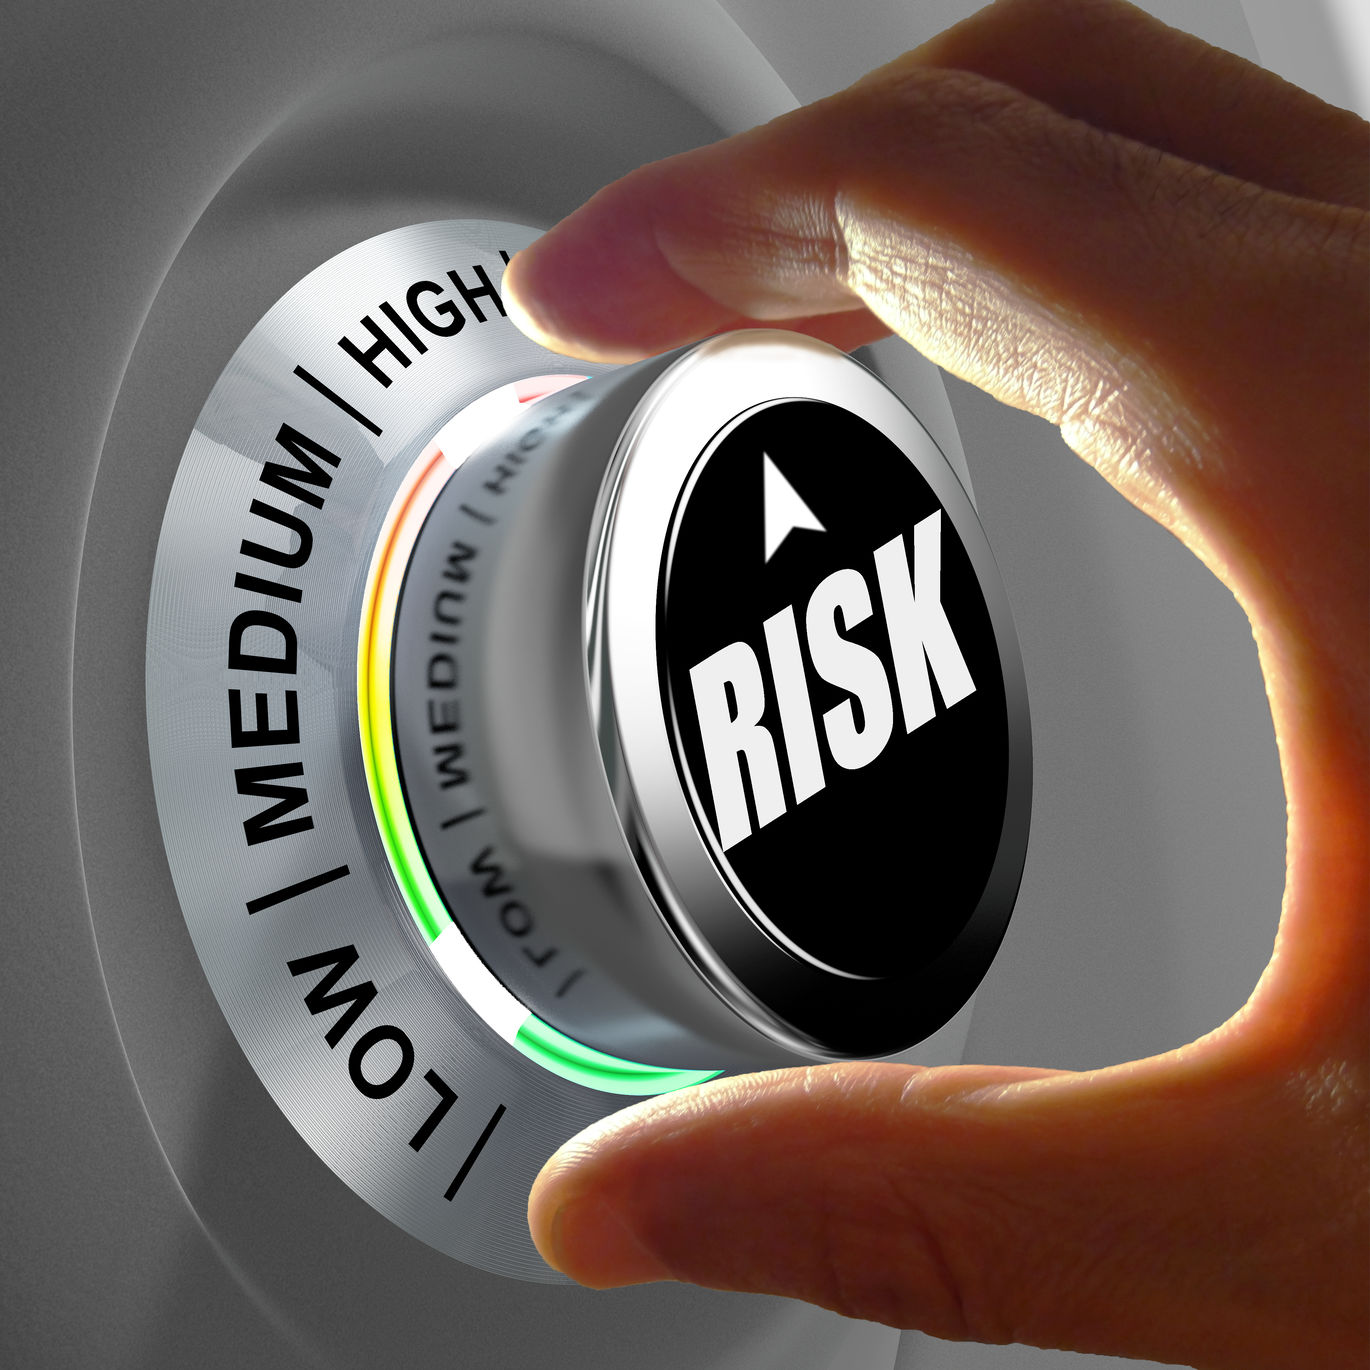 The button shows three levels of risk management. Concept illustration.